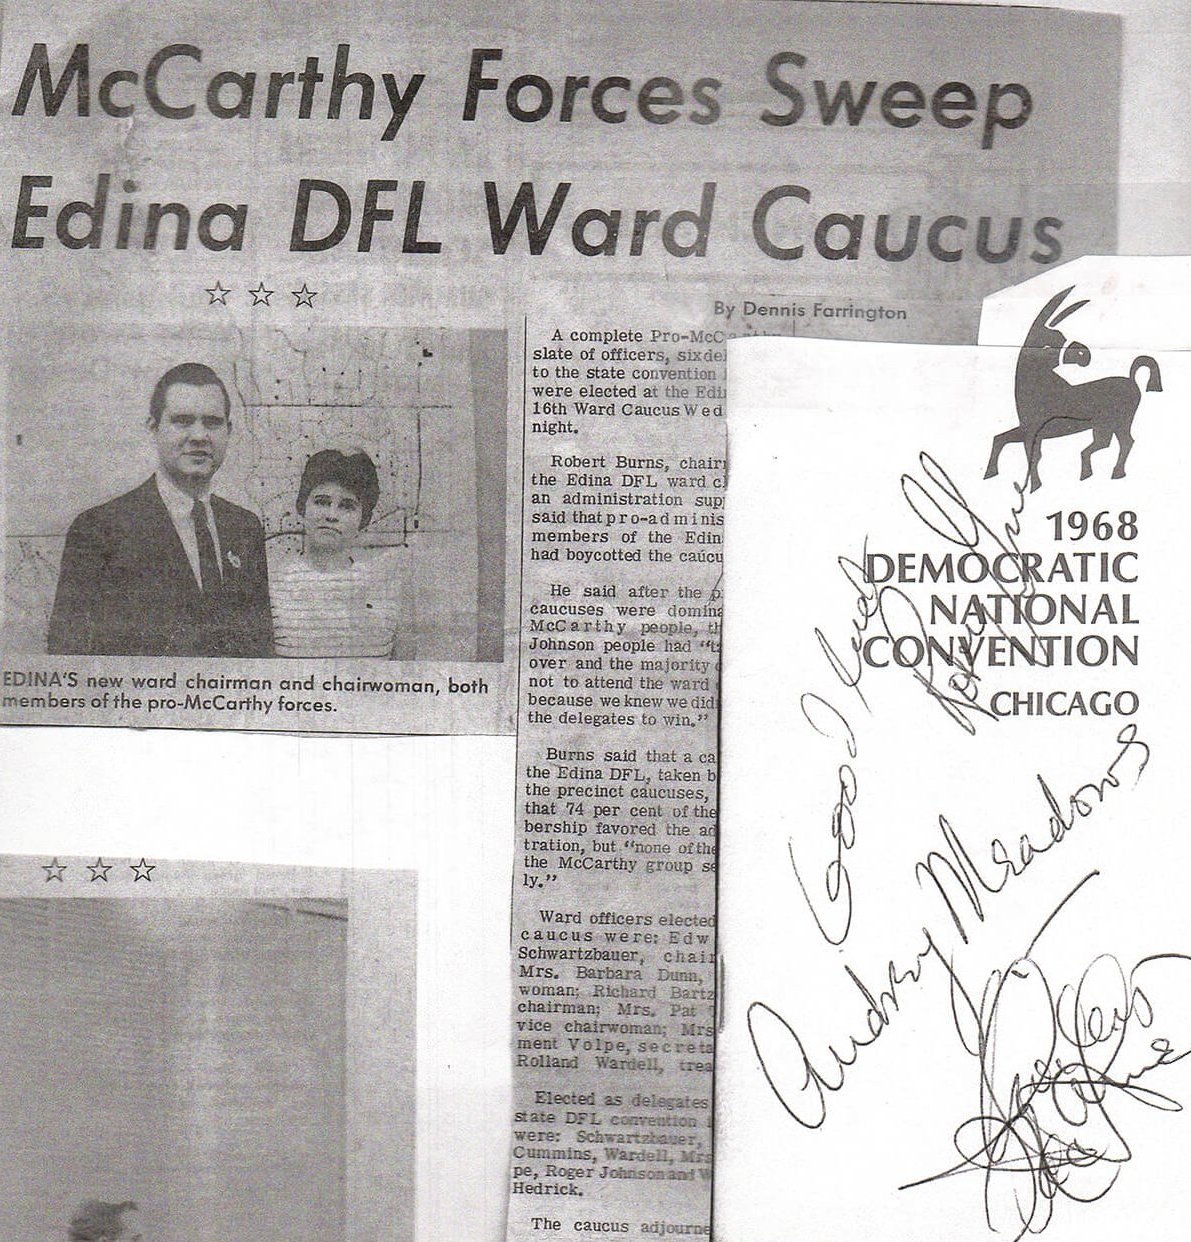 Newspaper clipping: "McCarthy Forces Sweep Edina Ward Caucus" and autographs from Audrey Meadows, Shirley MacLaine and one other on letterhead from the 1968 DNC in Chicago.